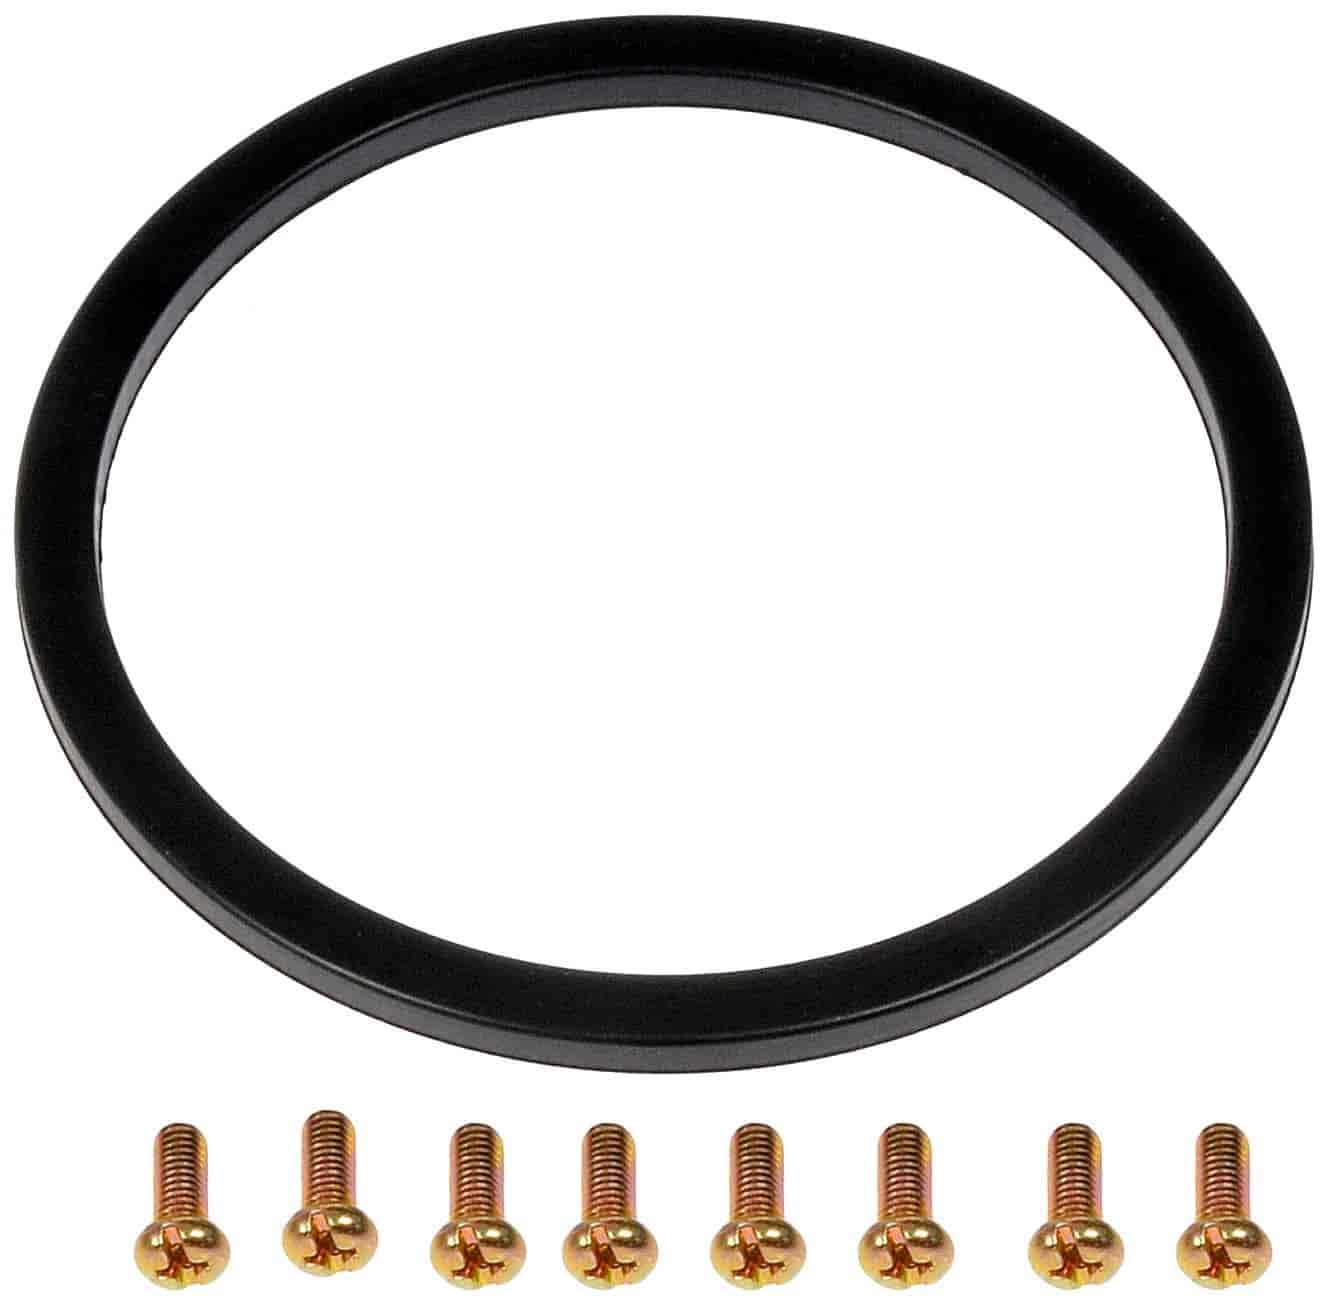 Fuel Pump Lock Ring for Select 1997-2001 Toyota/Lexus